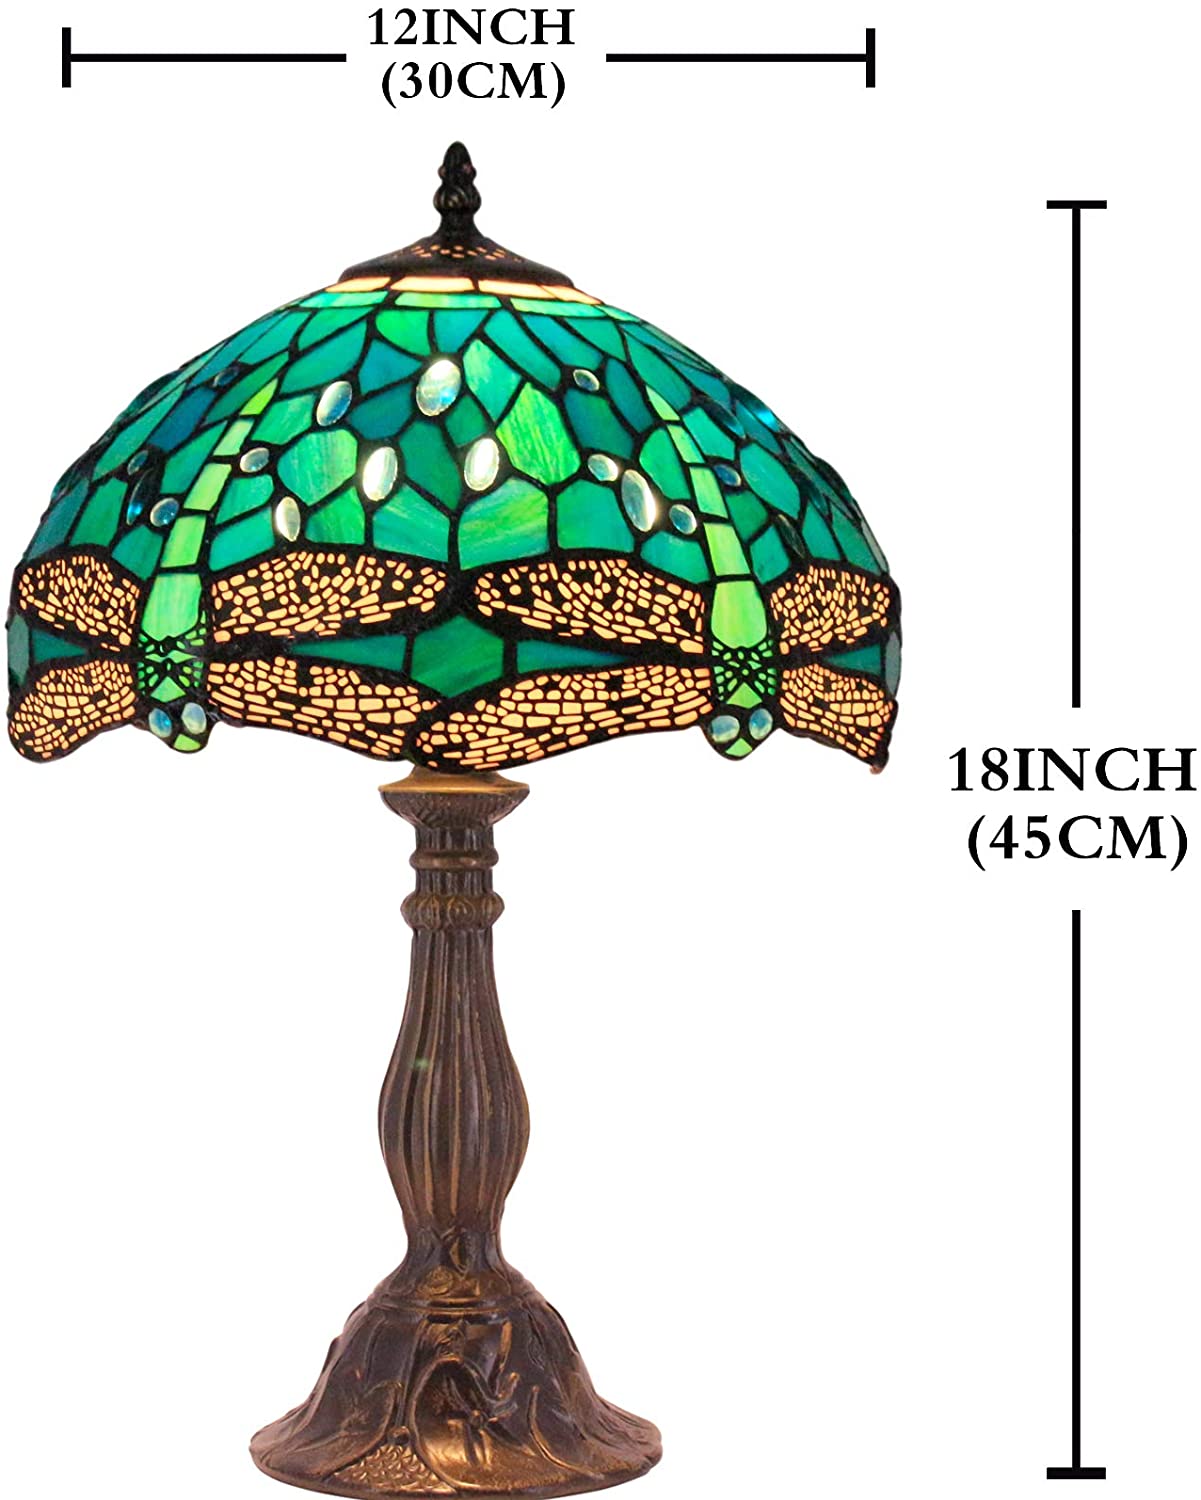  Lamp Green Blue Stained Glass Dragonfly Style Bedside Table Lamp Desk Reading Light 12X12X18 Inches Decor Bedroom Living Room Home Office S622 Series